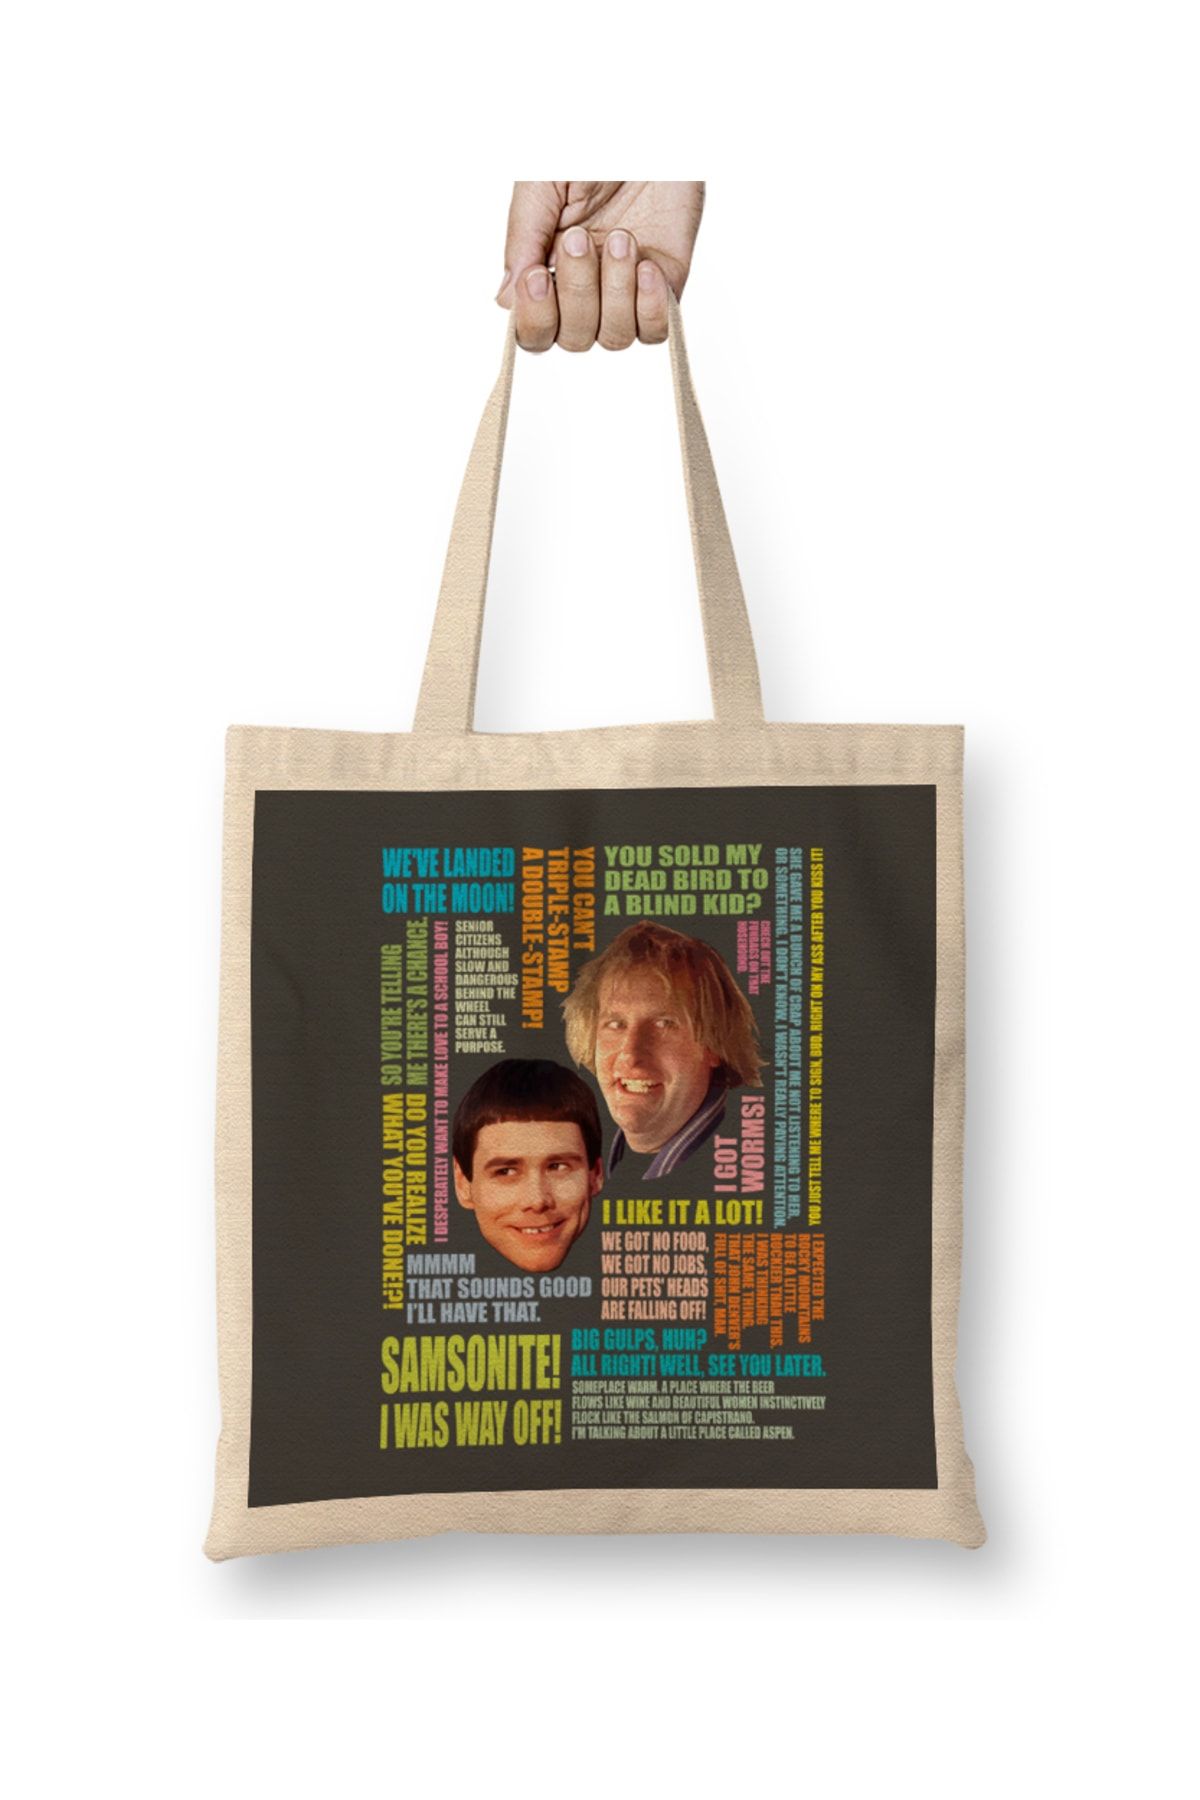 Dumb and Dumber - White Tote Bag - Frankly Wearing